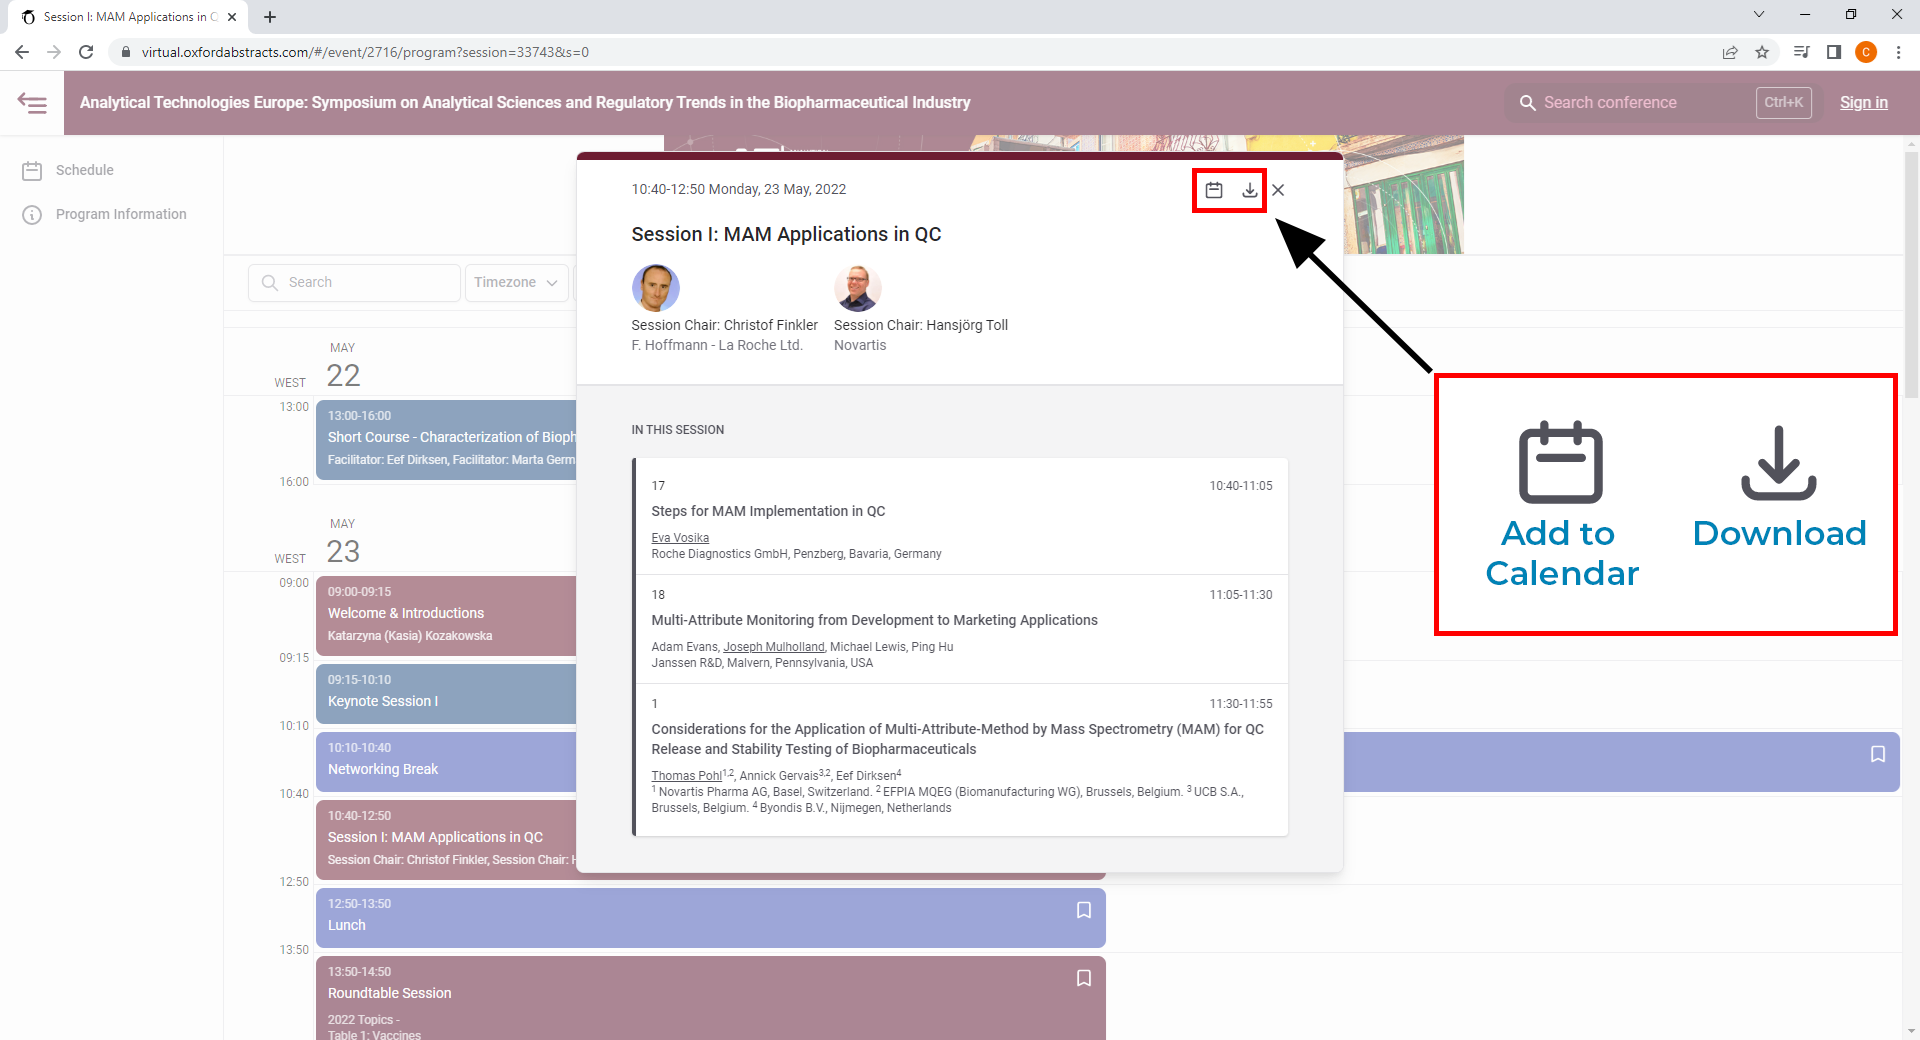 Image of scientific program online with add to calendar and download feature icons